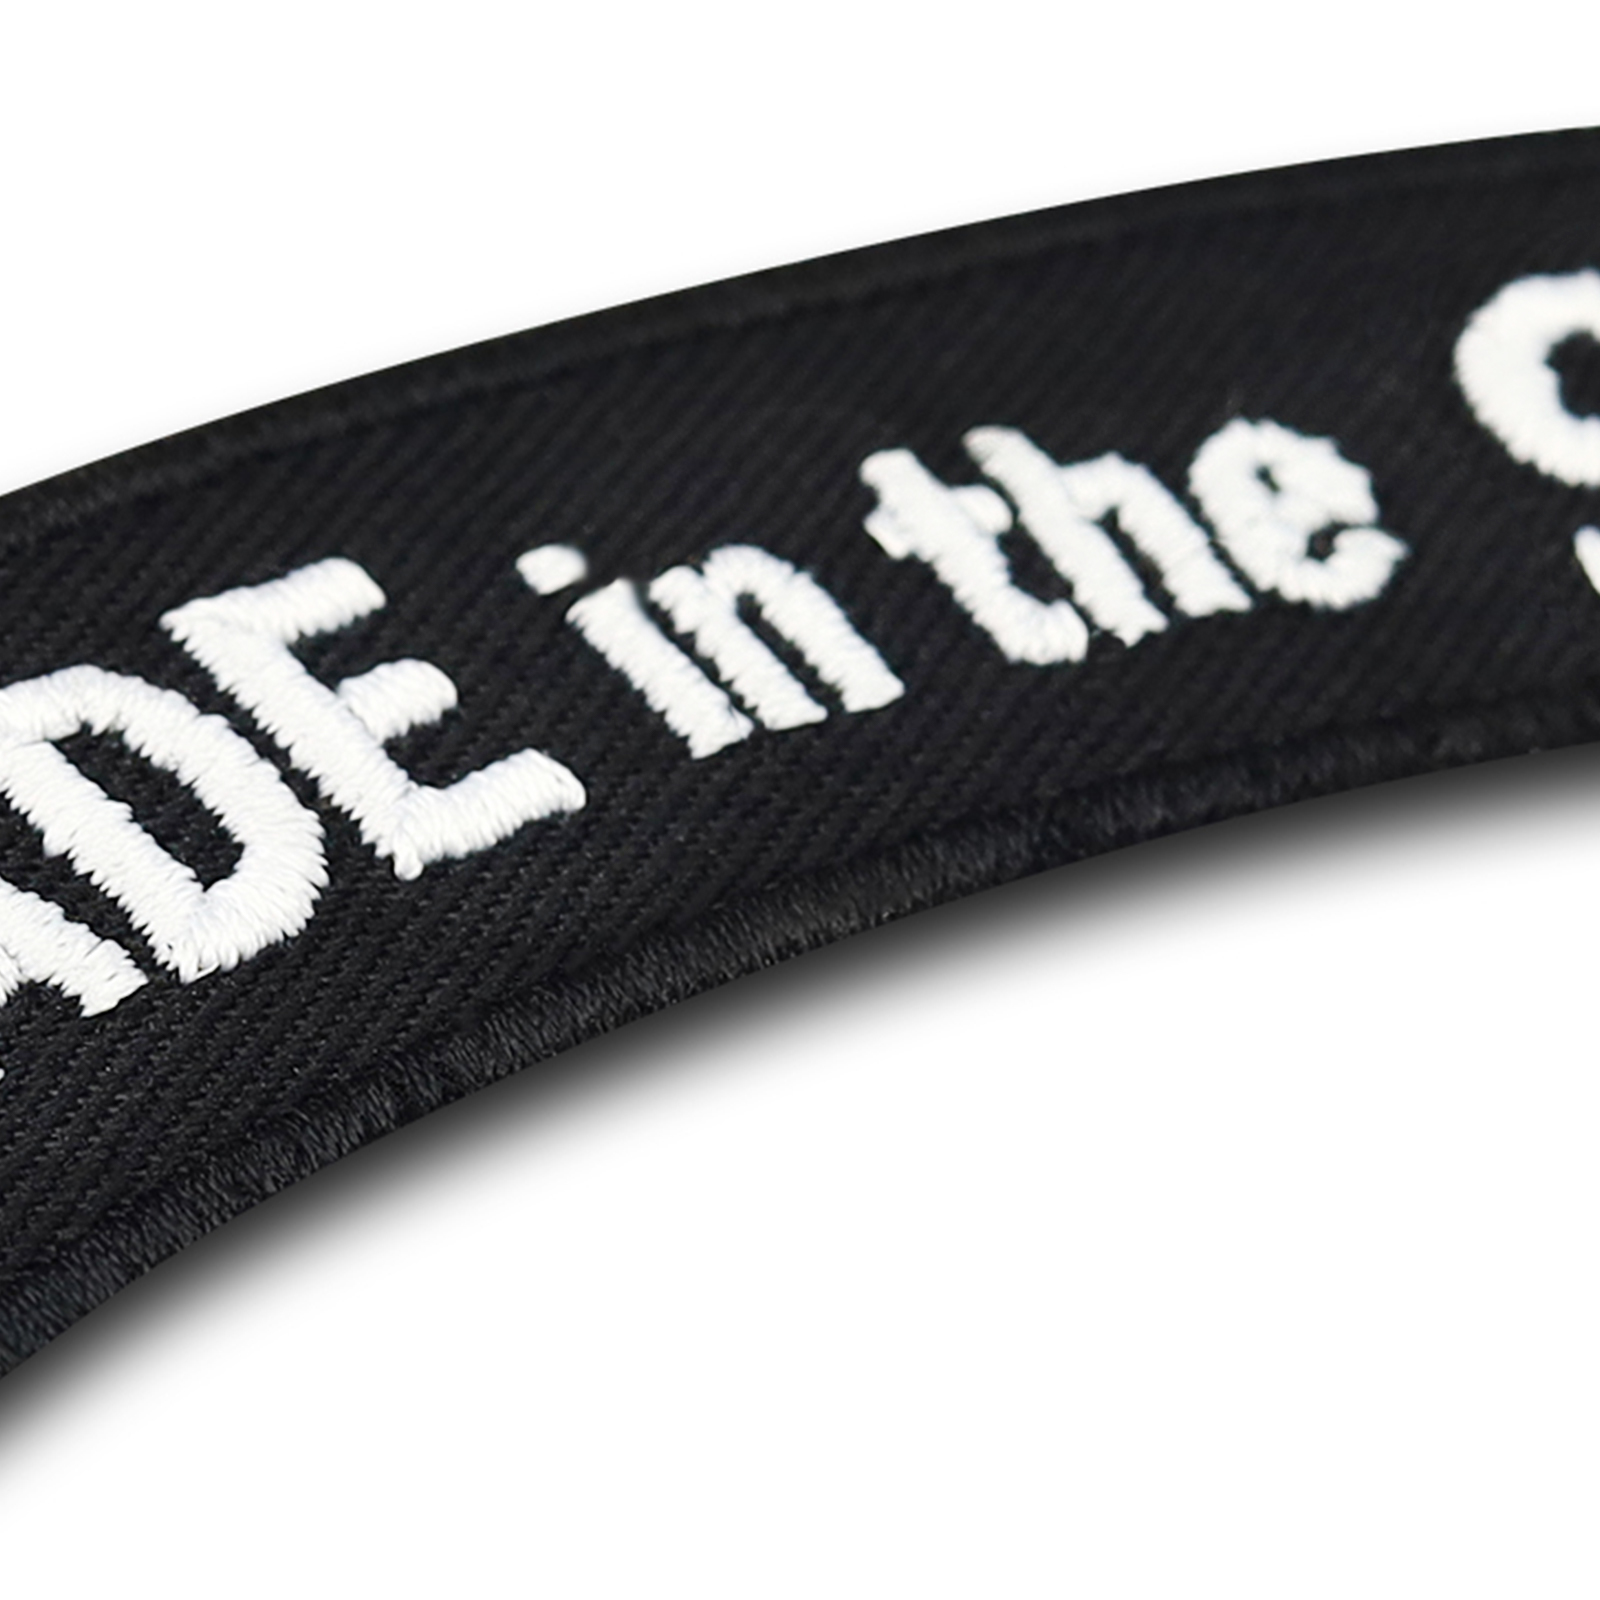 Made in the 90s - Patch